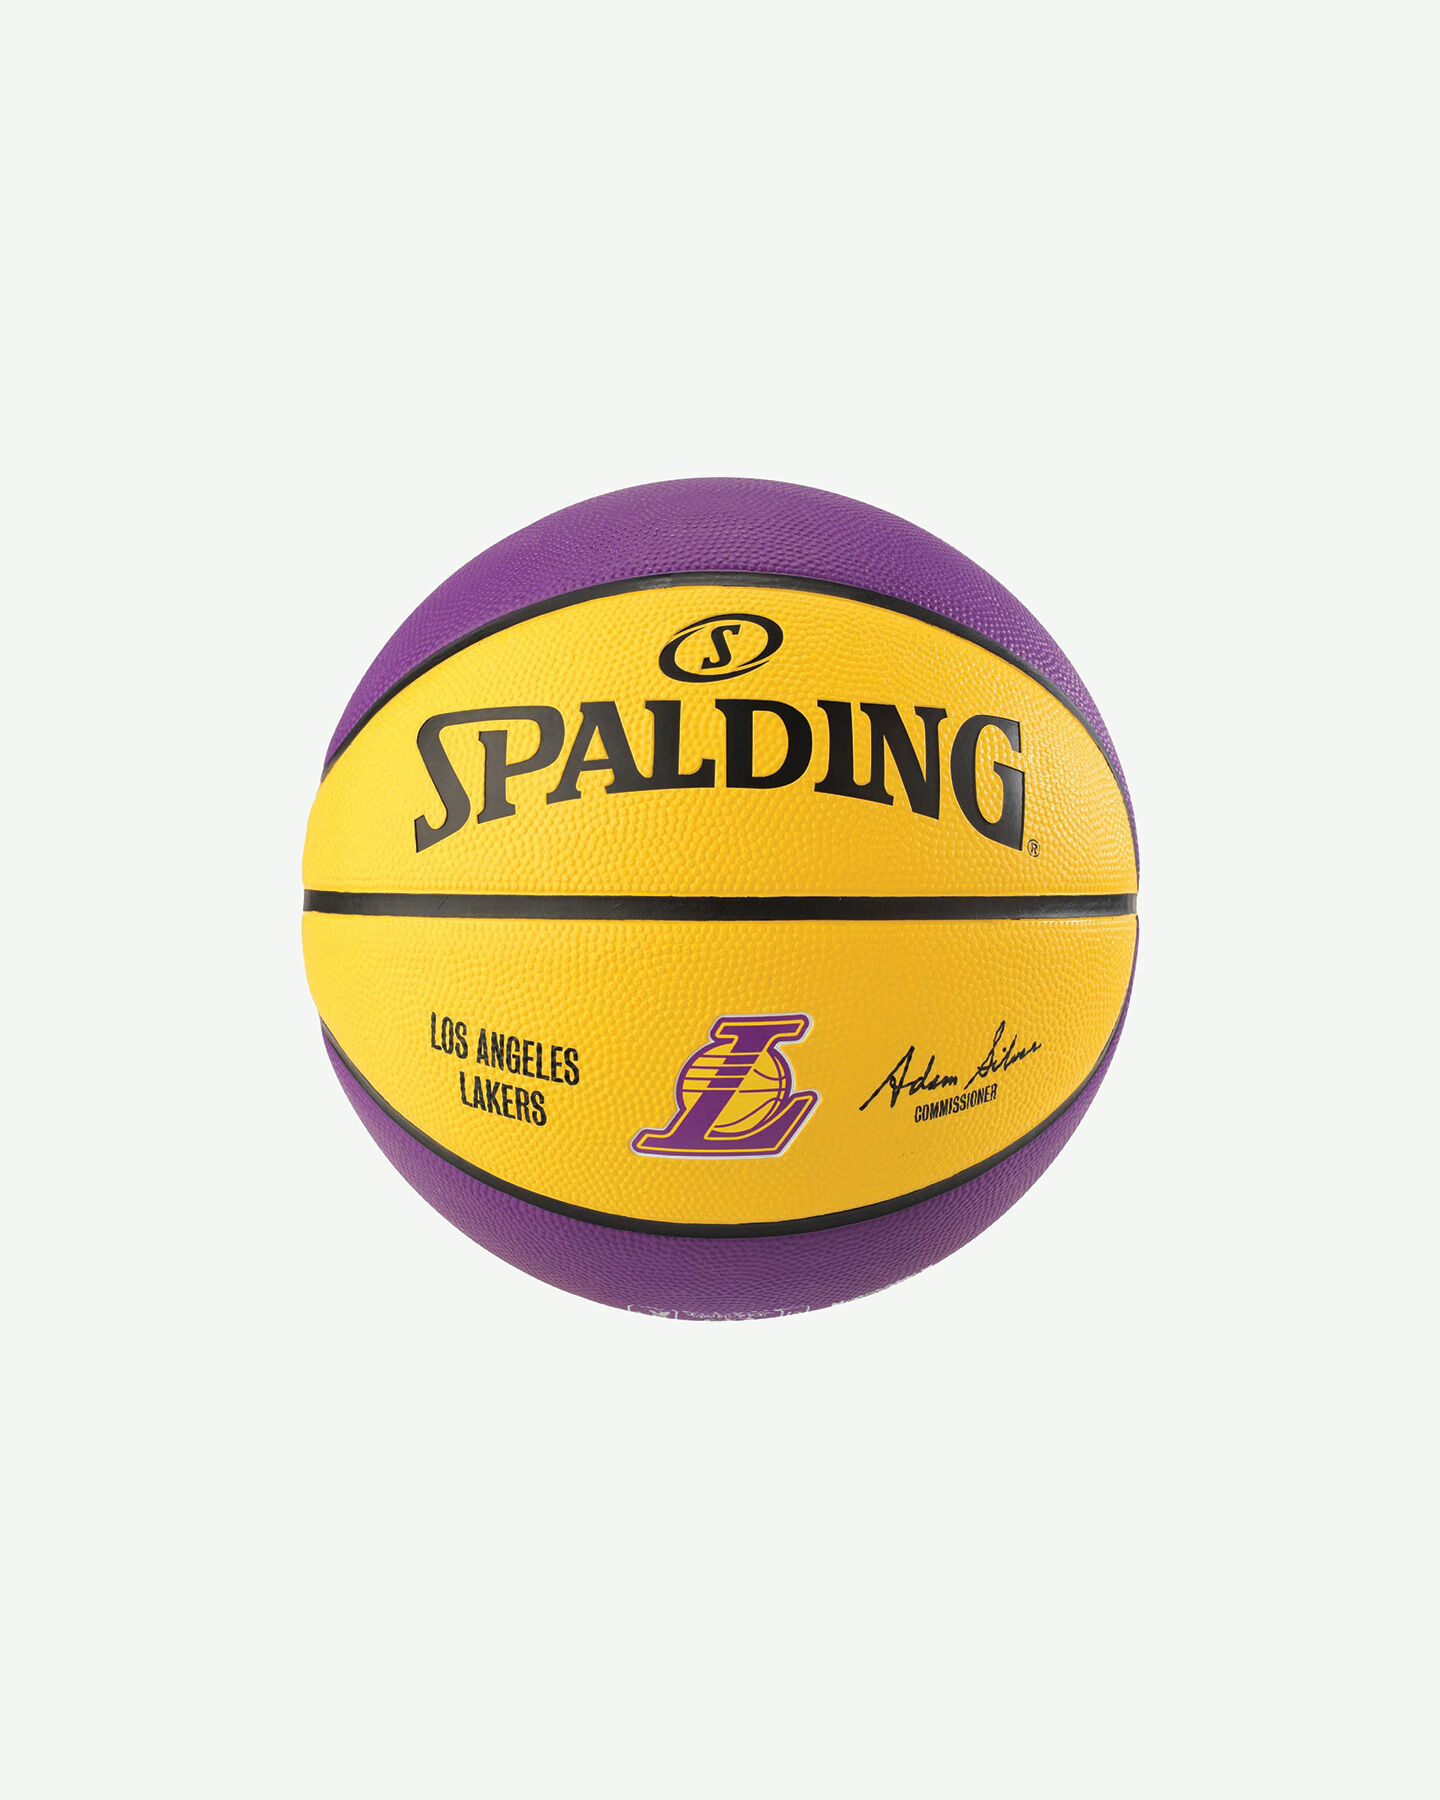  Pallone basket SPALDING LOS ANGELES LAKERS MIS7 S1319335|UNI|7 scatto 1